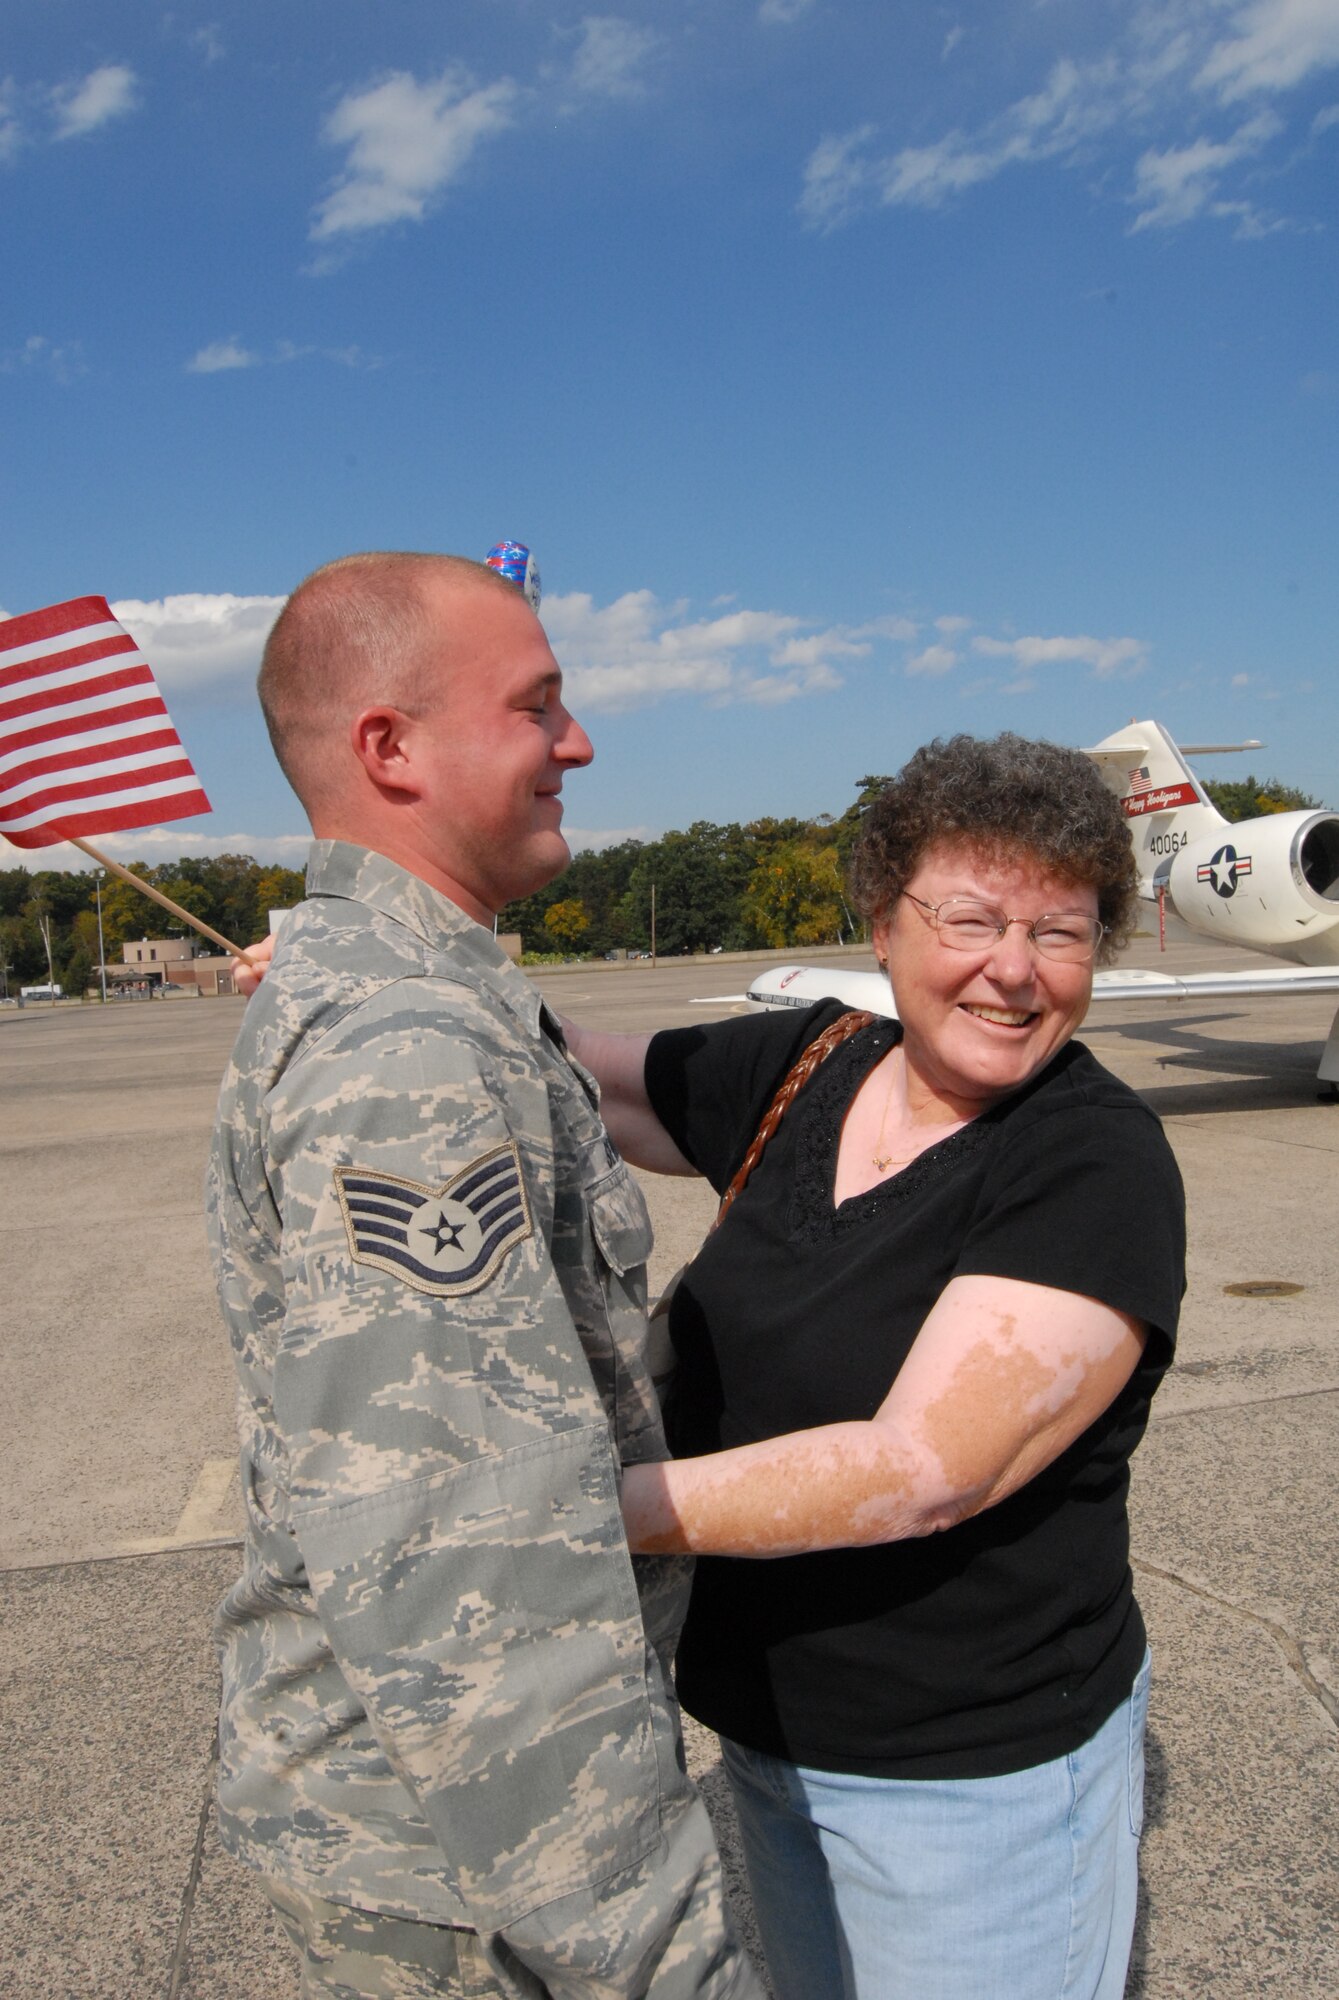 Staff Sgt. Steven Sevigny, 103rd Maintenance Squadron, gets a warm welcome from his mom, Judy Sevigny, on the flightline at Bradley Air National Guard Base , East Granby, Conn. Oct. 4, 2009.  Sevigny had returned home after deployment to Southwest Asia in support of overseas contingency operations.  (U.S. Air Force Photo by Capt. Jefferson S. Heiland)